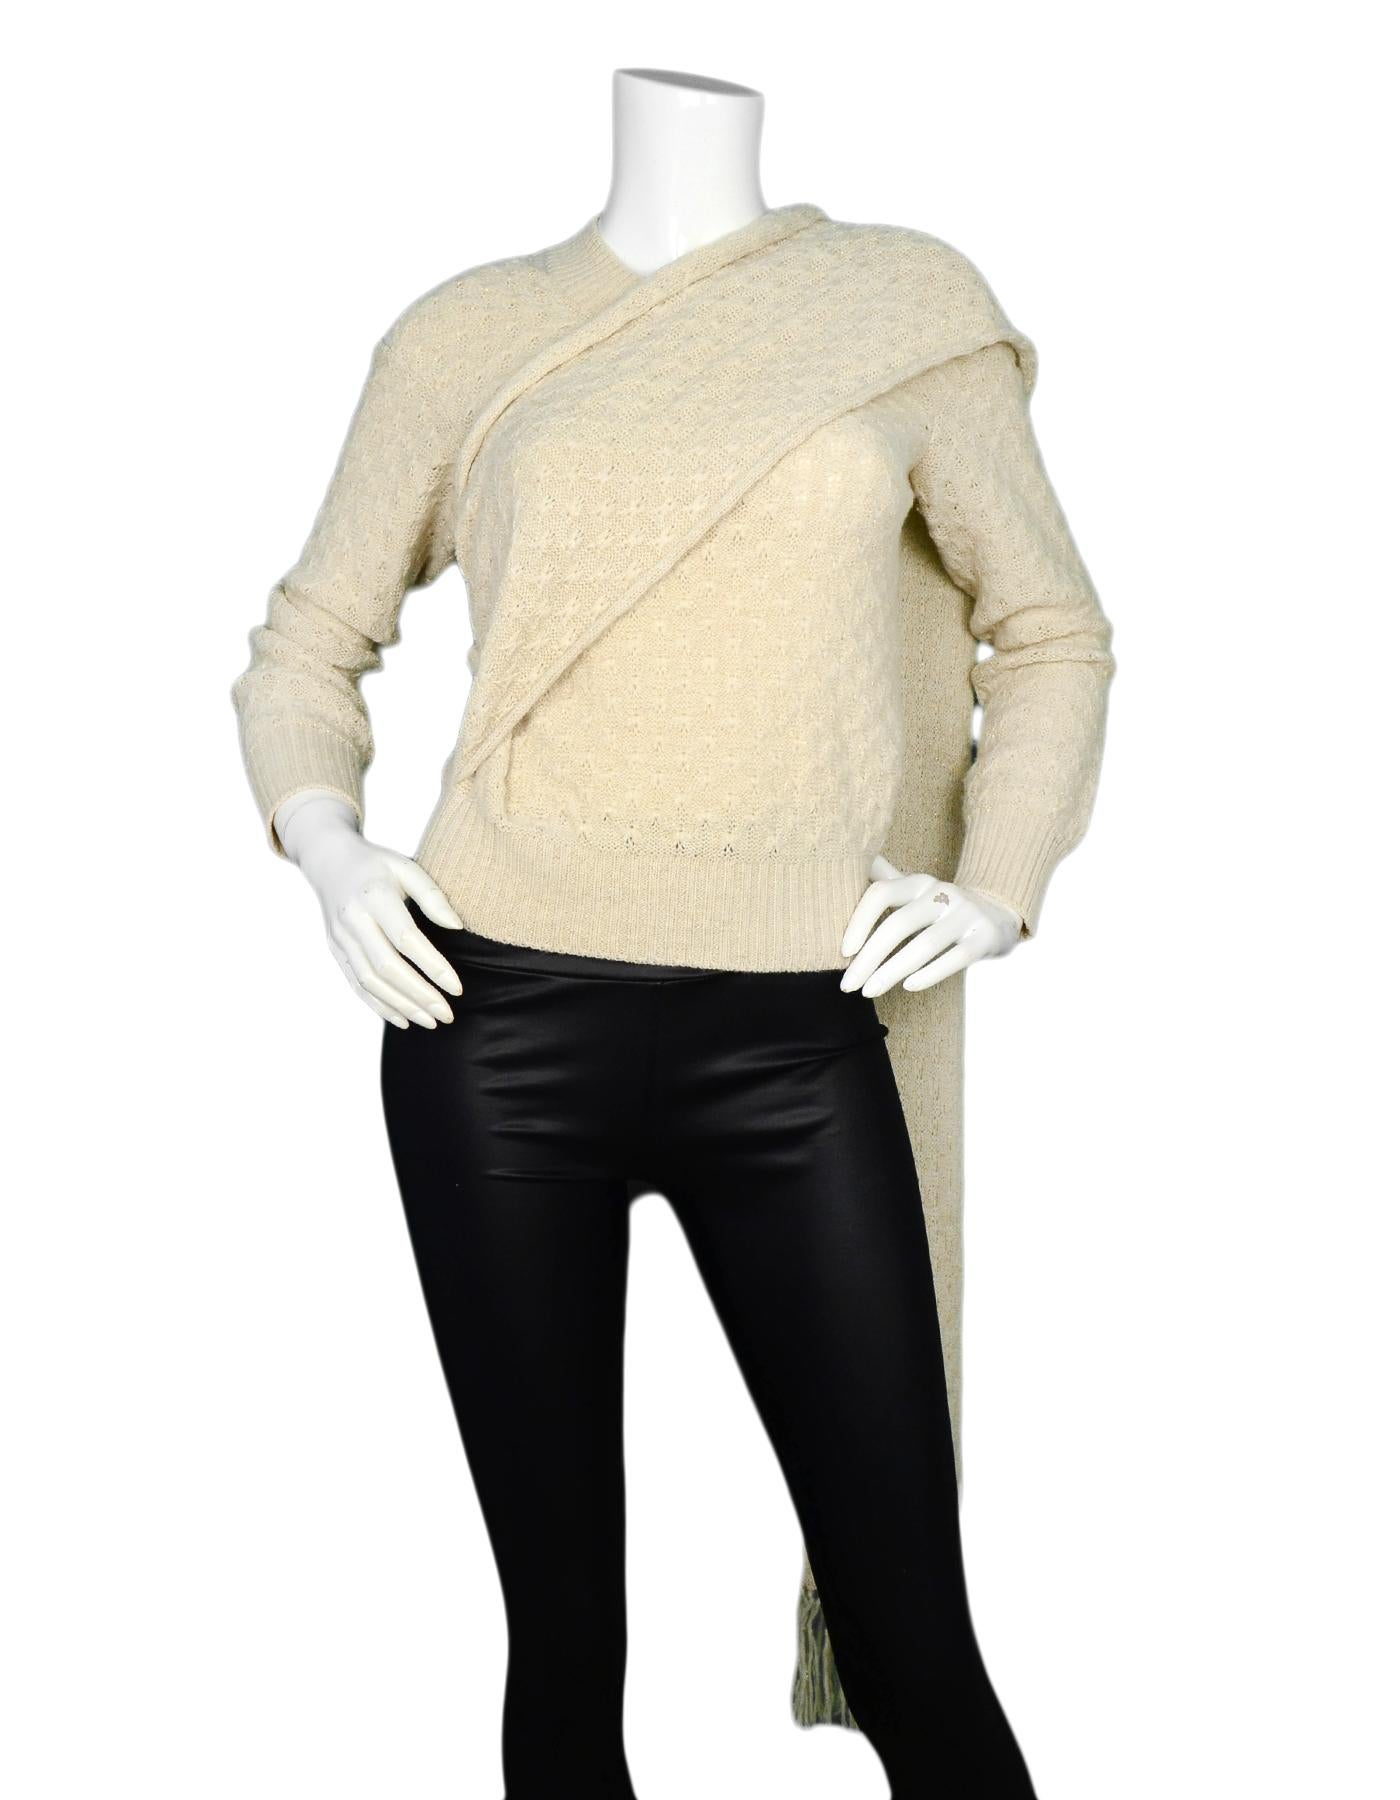 Chanel Cream Knit Sweater W/ Attached Scarf Sz 38

Made In: Italy
Color: Cream with gold sparkle
Materials: 75% alpaca, 20% rayon, 5% polyester
Opening/Closure: Pull over
Overall Condition: Excellent pre-owned condition with excpetion of a couple of